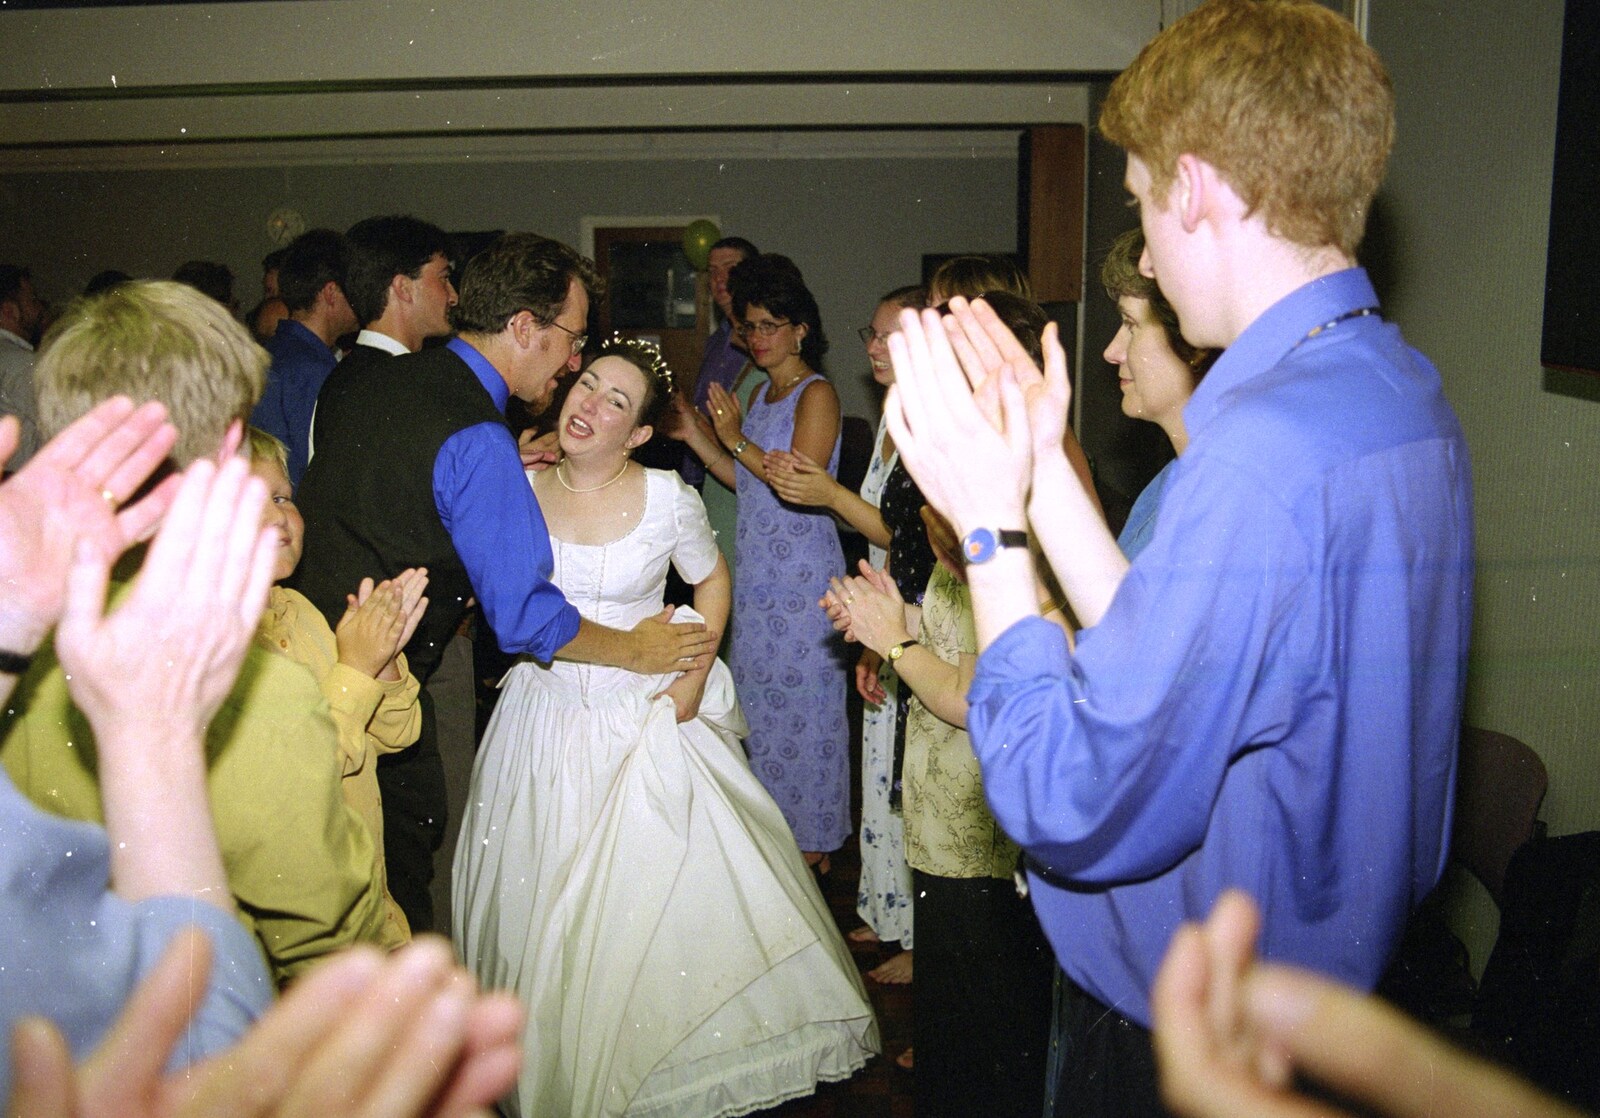 There's some applause  from Joe and Lesley's CISU Wedding, Ipswich, Suffolk - 30th July 1998